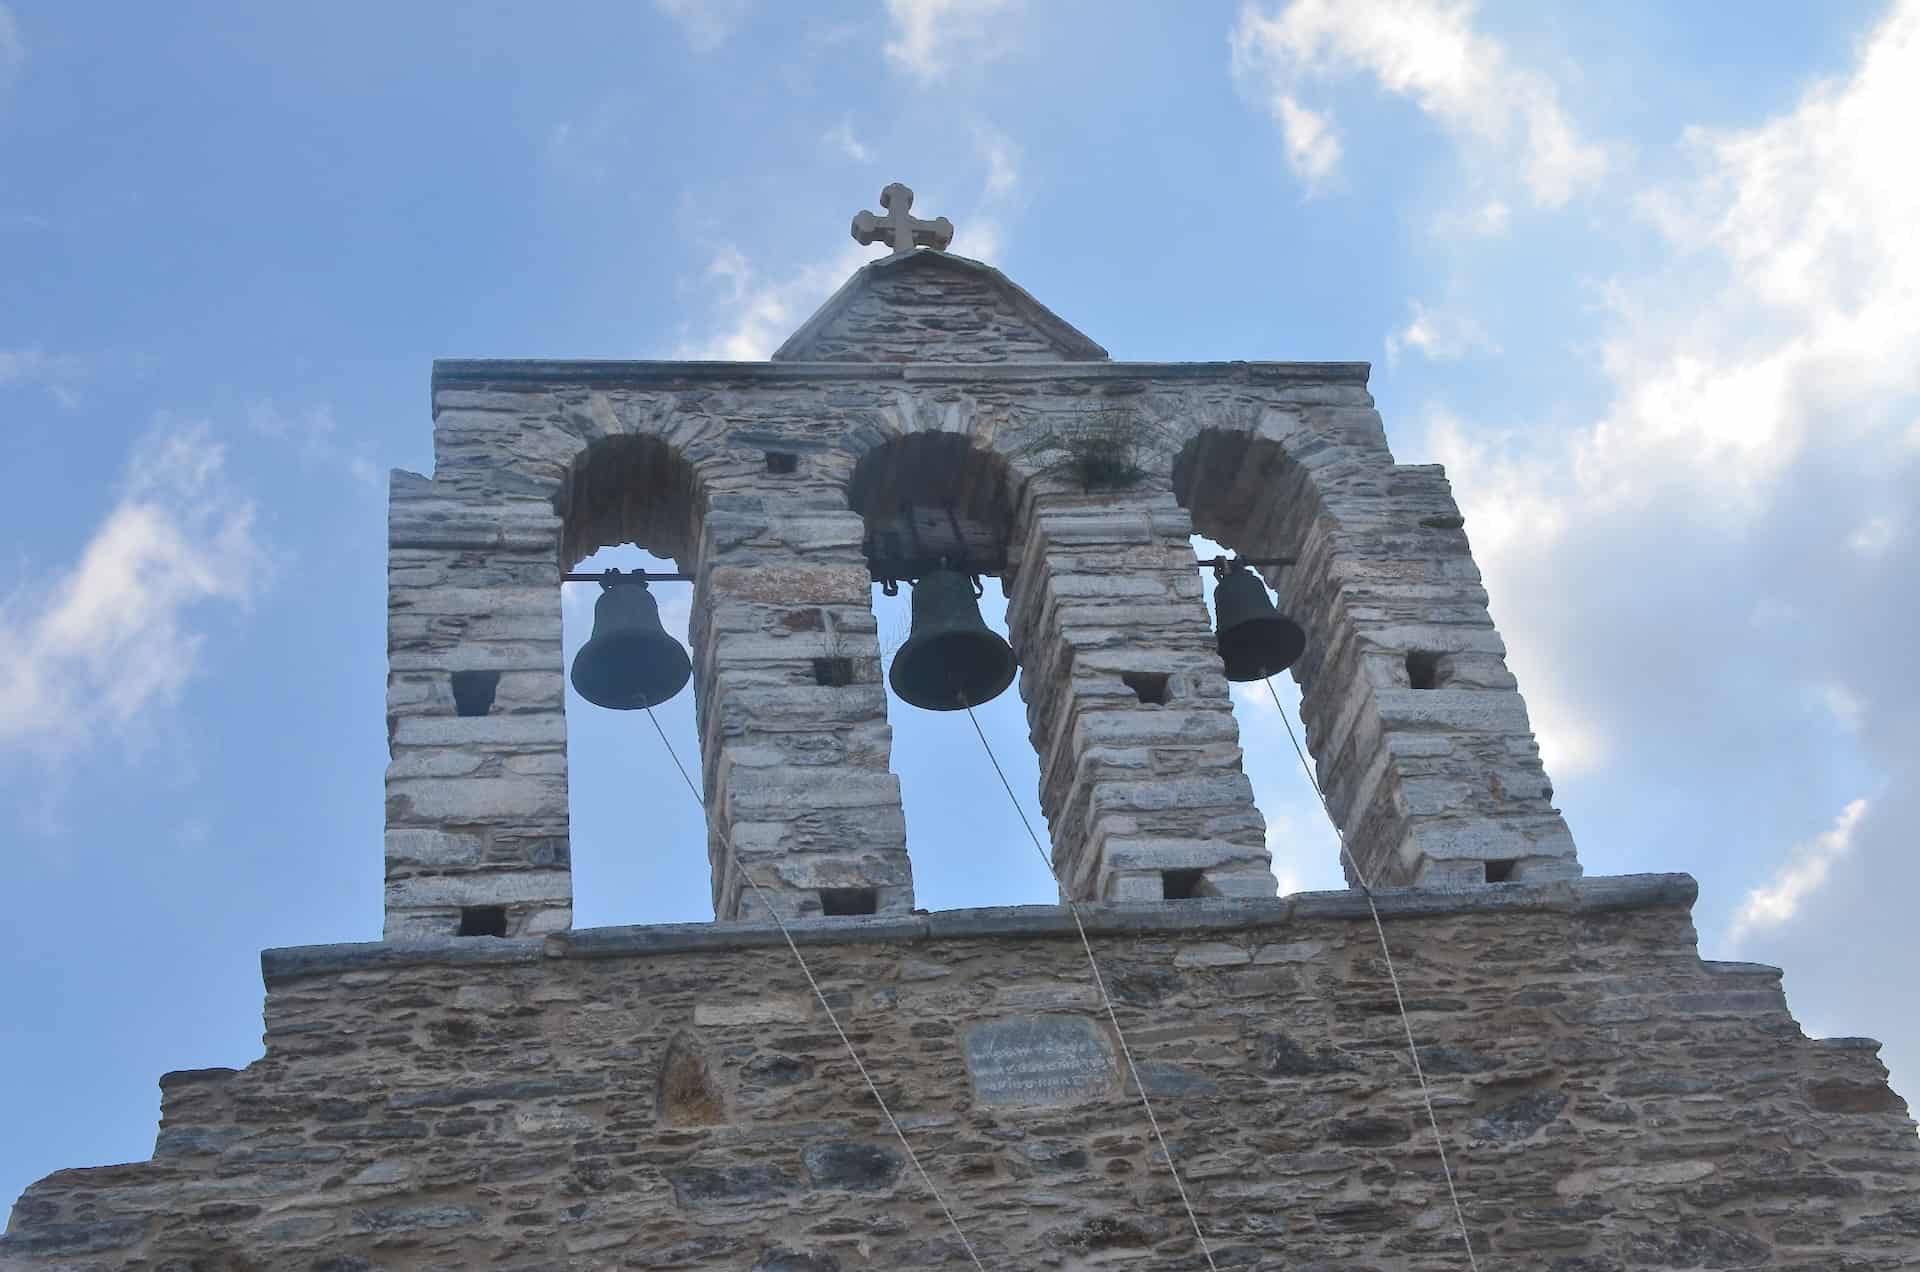 Bell tower at Panagia Drosiani in Naxos, Greece